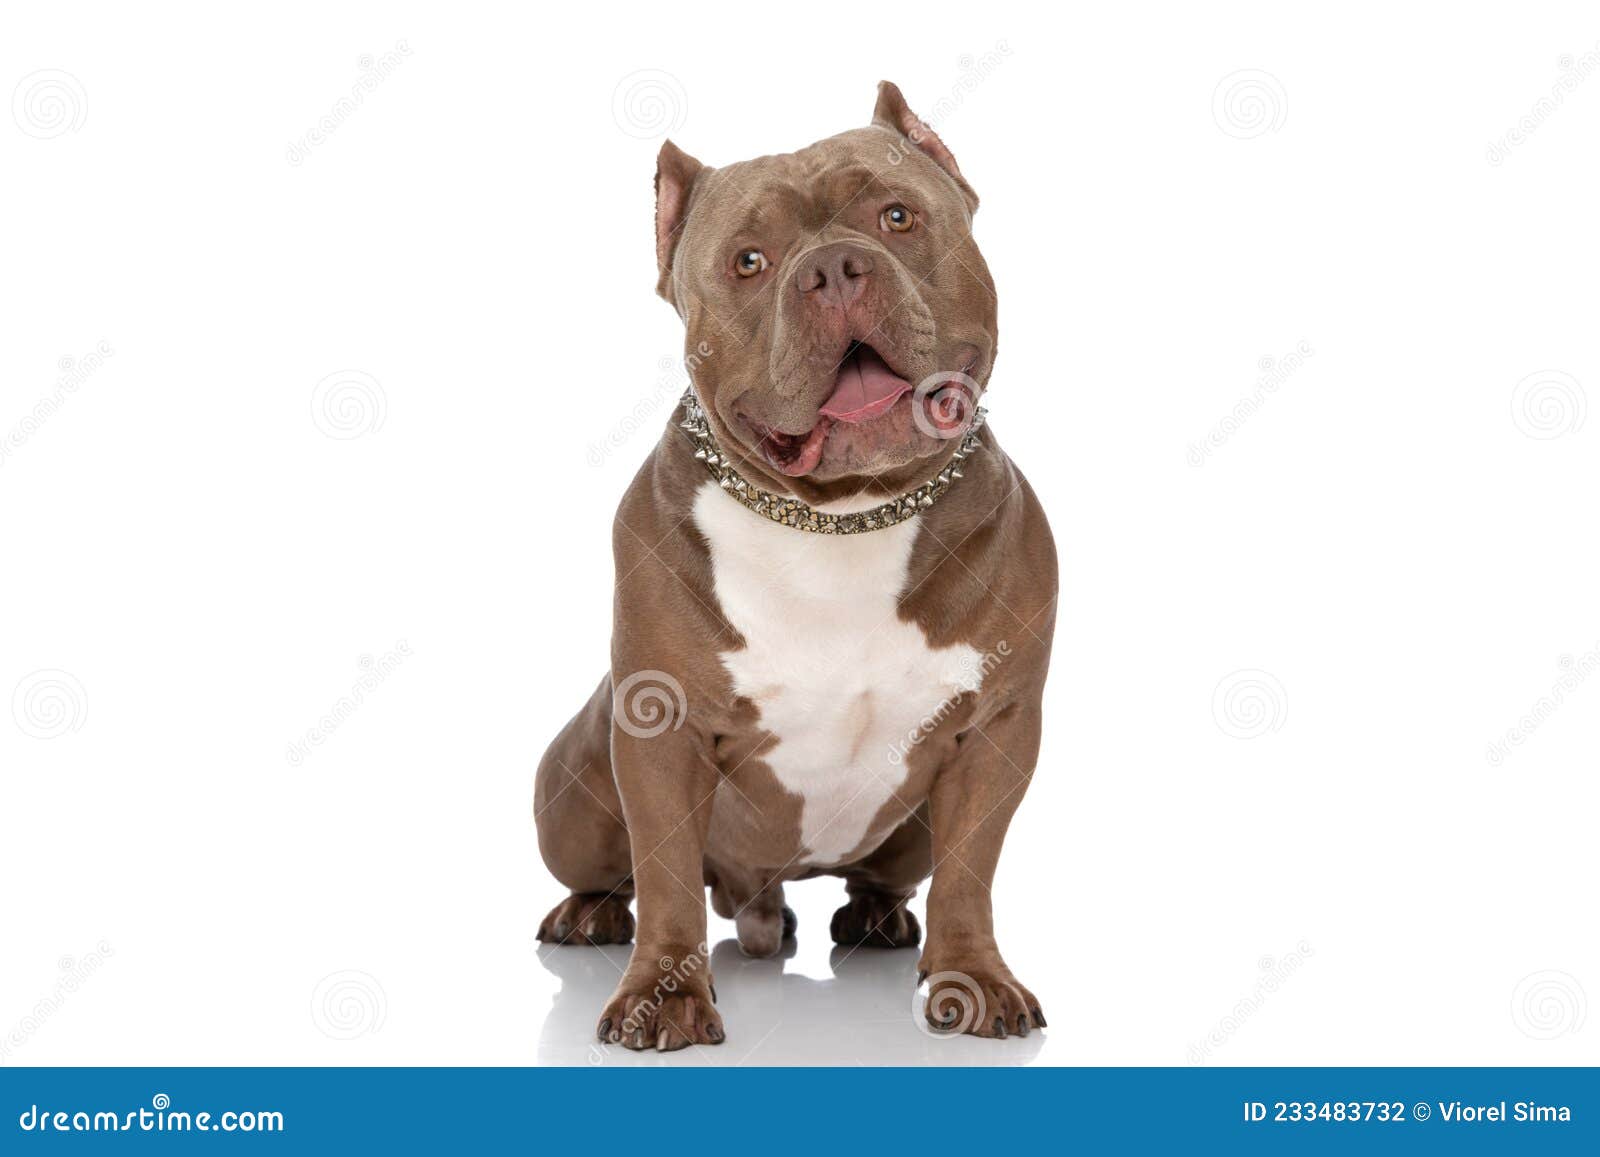 brown american bully dog looking up and panting